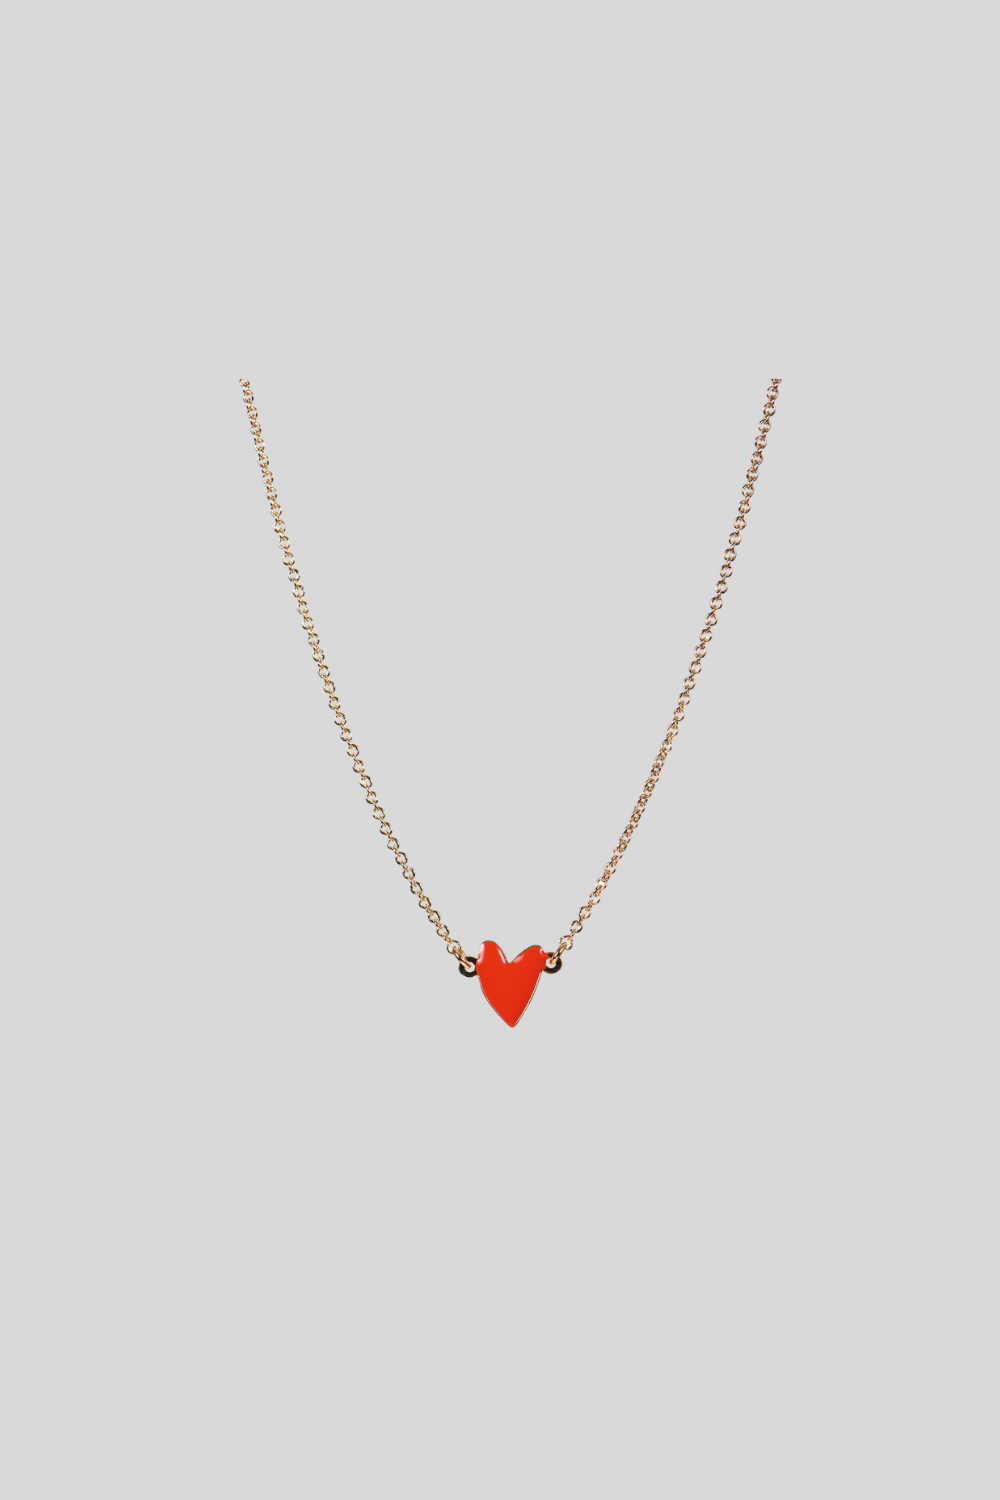 GRANT heart necklace